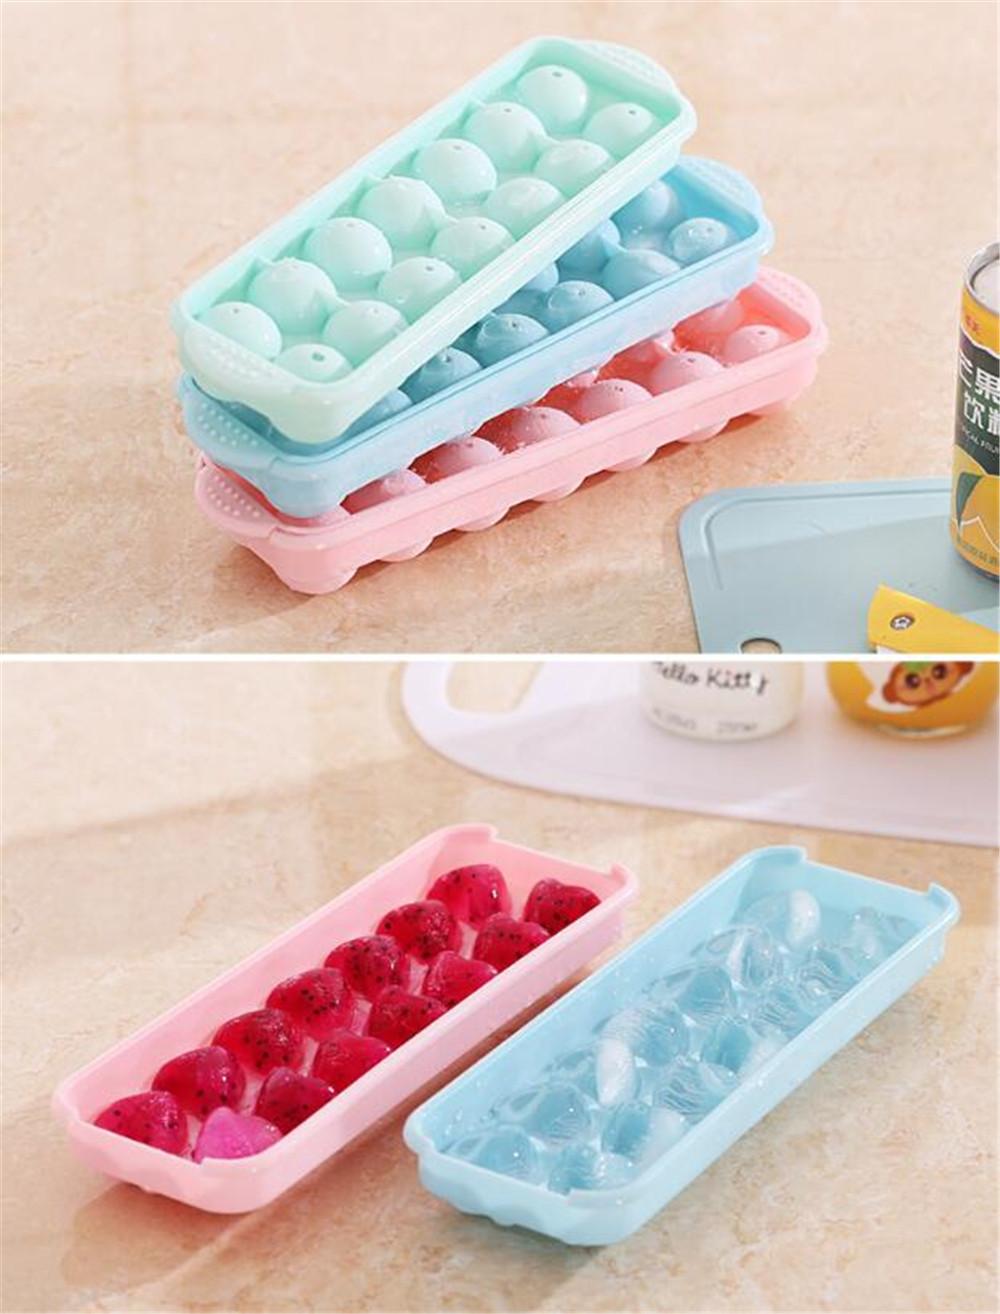 ROUND ICE CUBE TRAY BALL MAKER MOLD FOR FREEZER